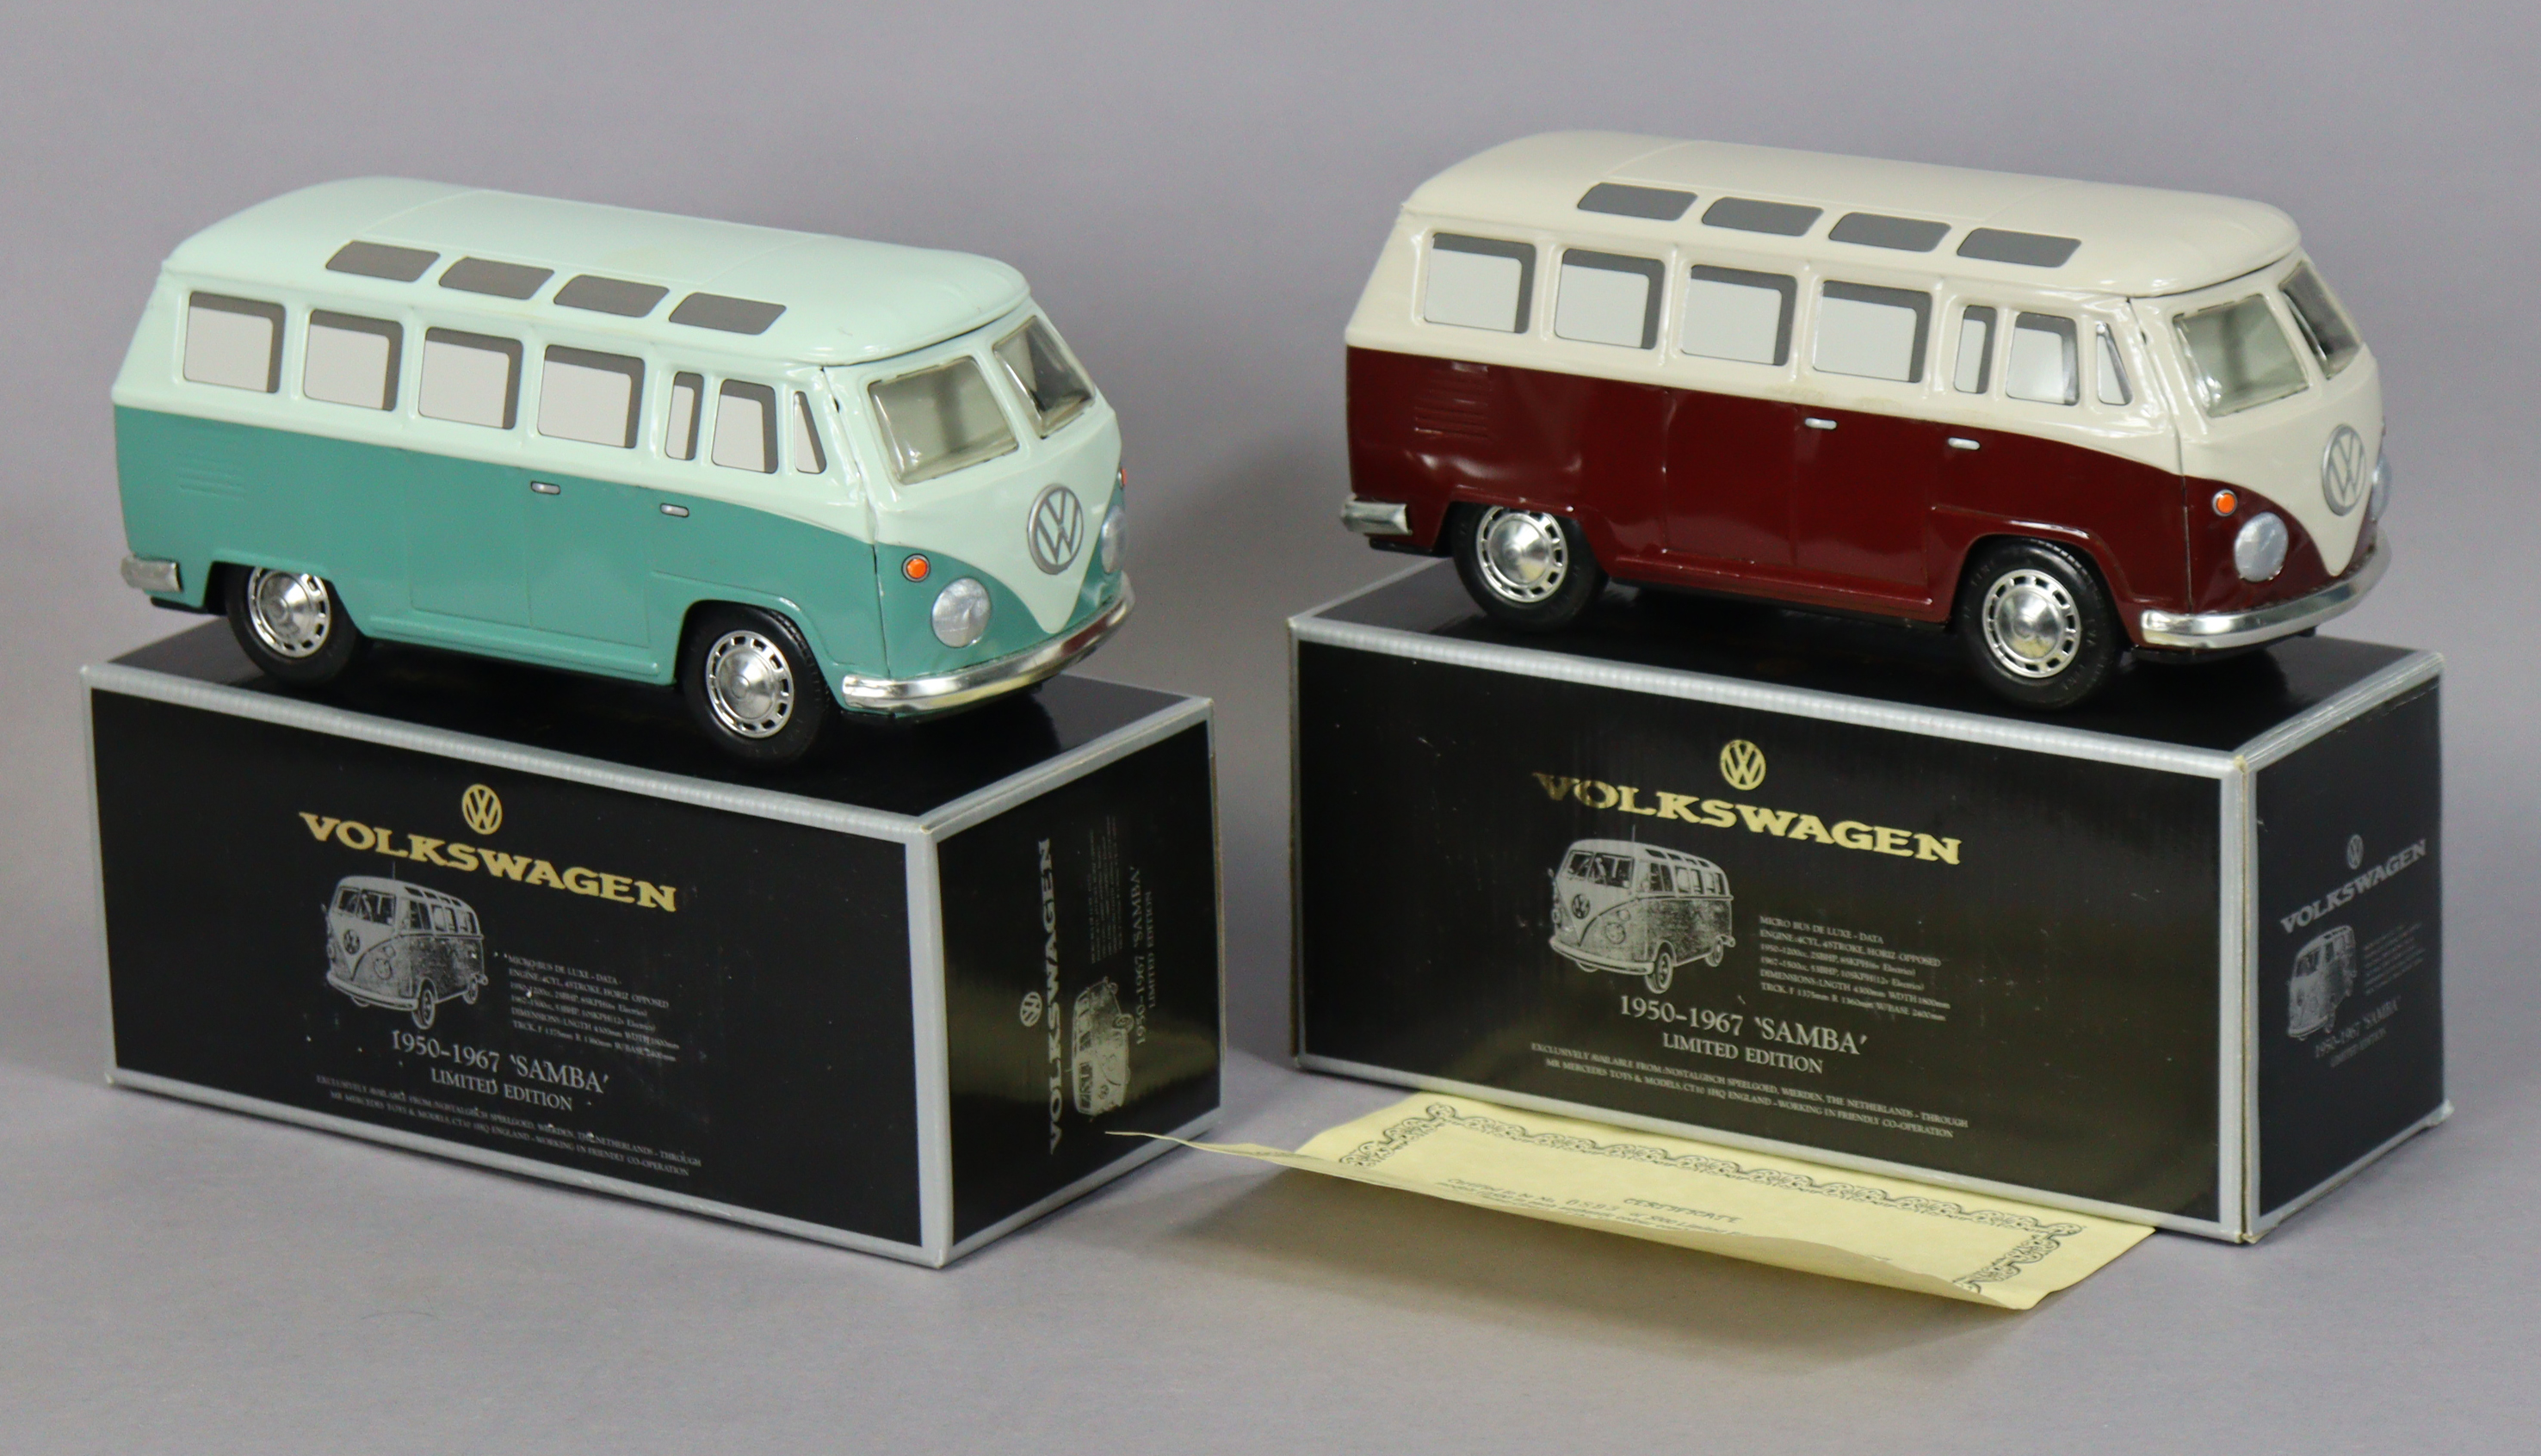 Two Ichiko Limited Edition scale model Volkswagen 1950-1967 “Samba” camper vans; both boxed.